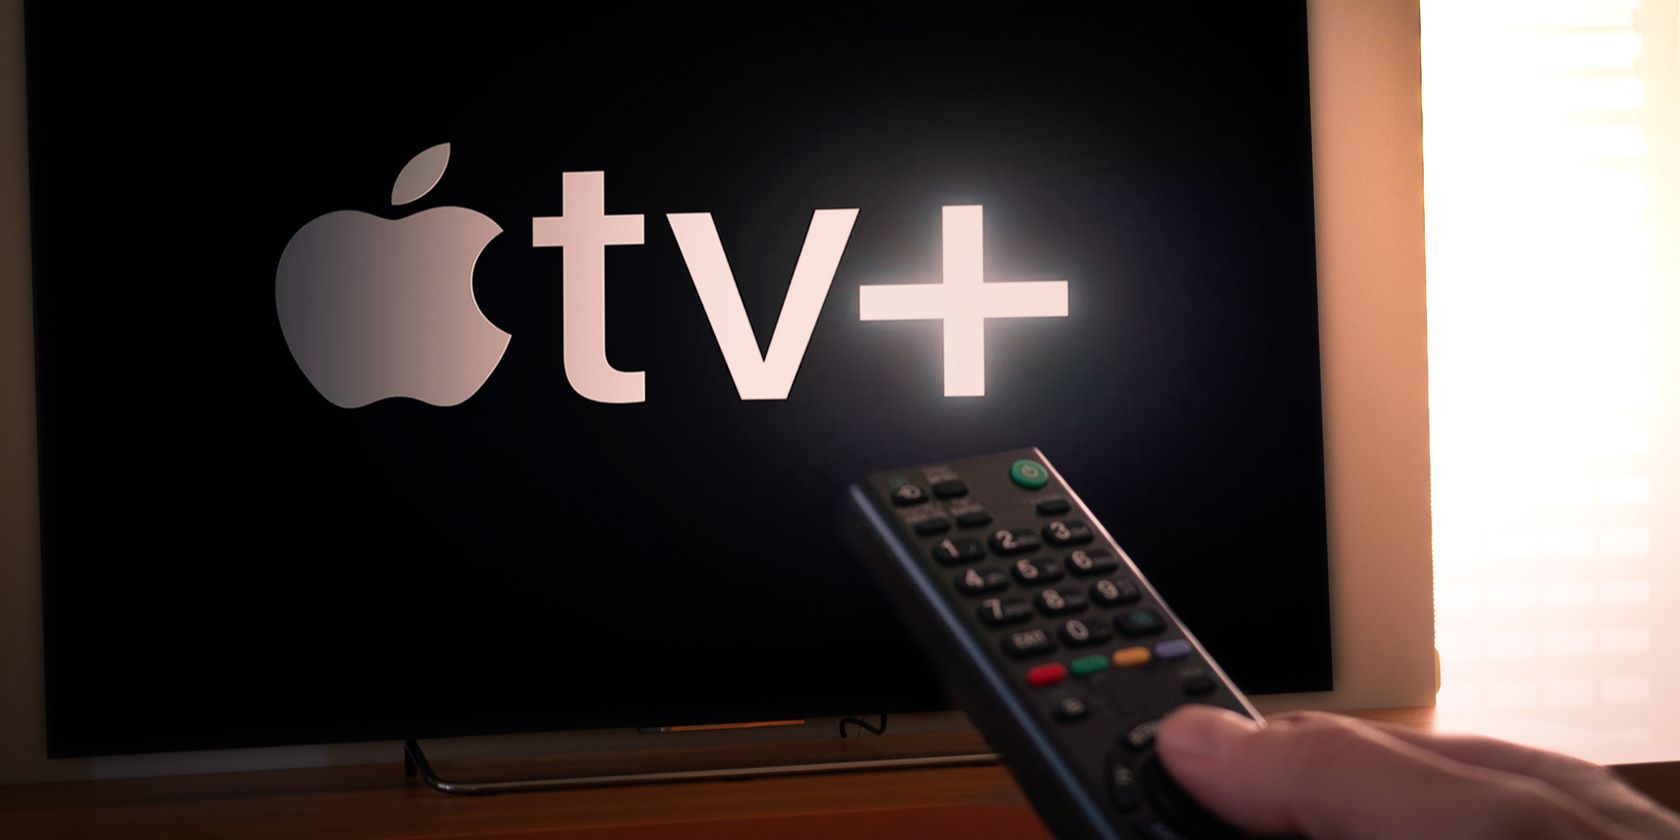 How to Install Apple TV+ on a Samsung Smart TV